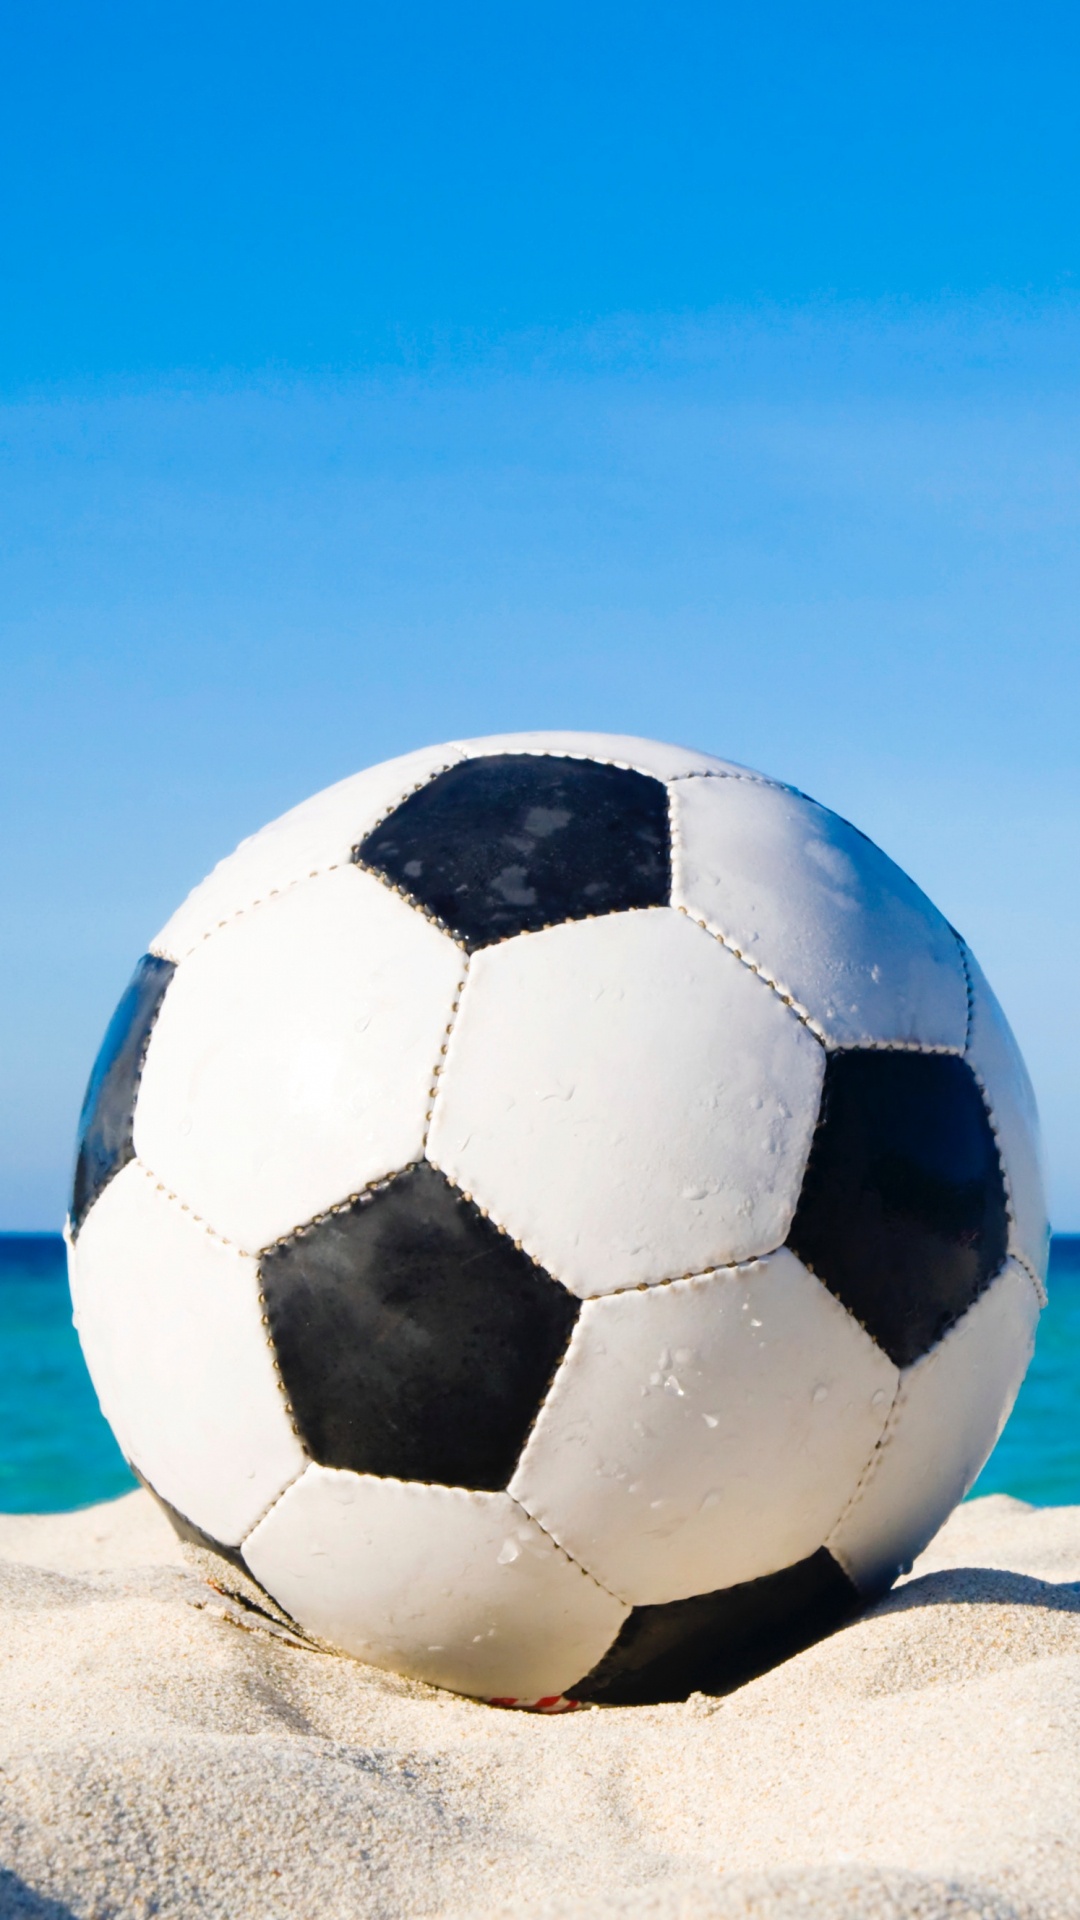 White and Black Soccer Ball on White Sand During Daytime. Wallpaper in 1080x1920 Resolution